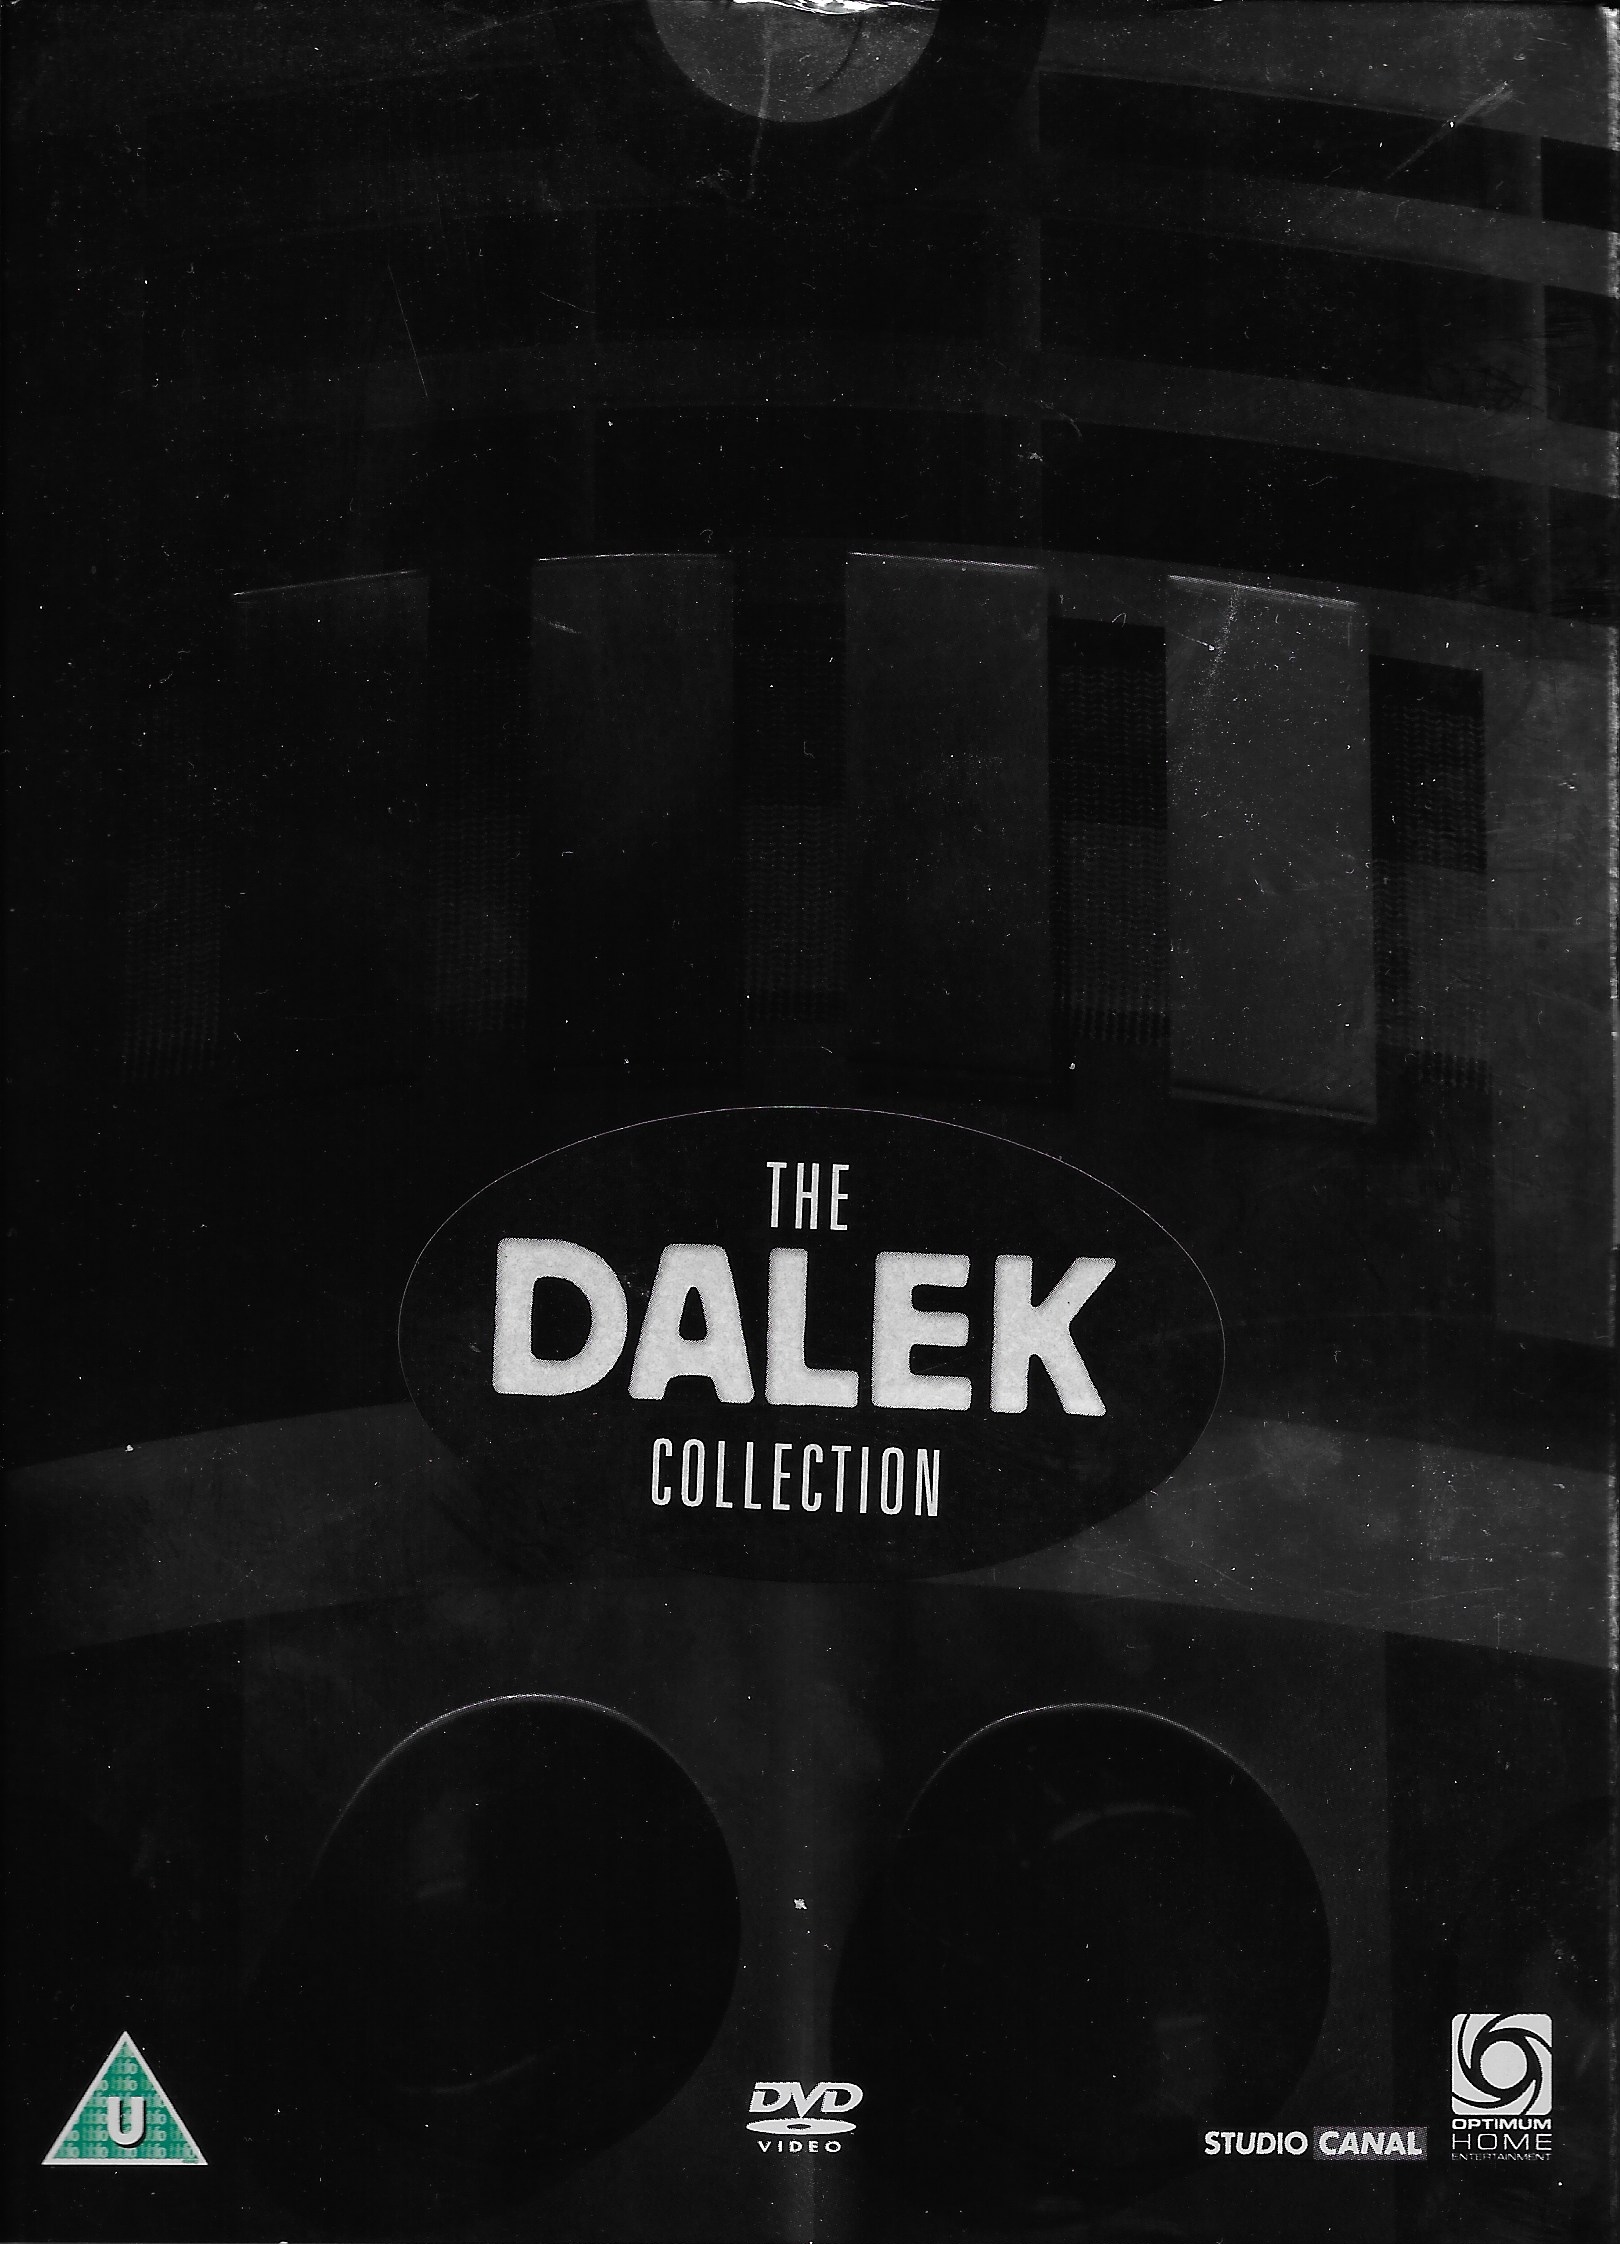 Picture of OPTD 0591 The Dalek Collection by artist Milton Subotsky from the BBC dvds - Records and Tapes library